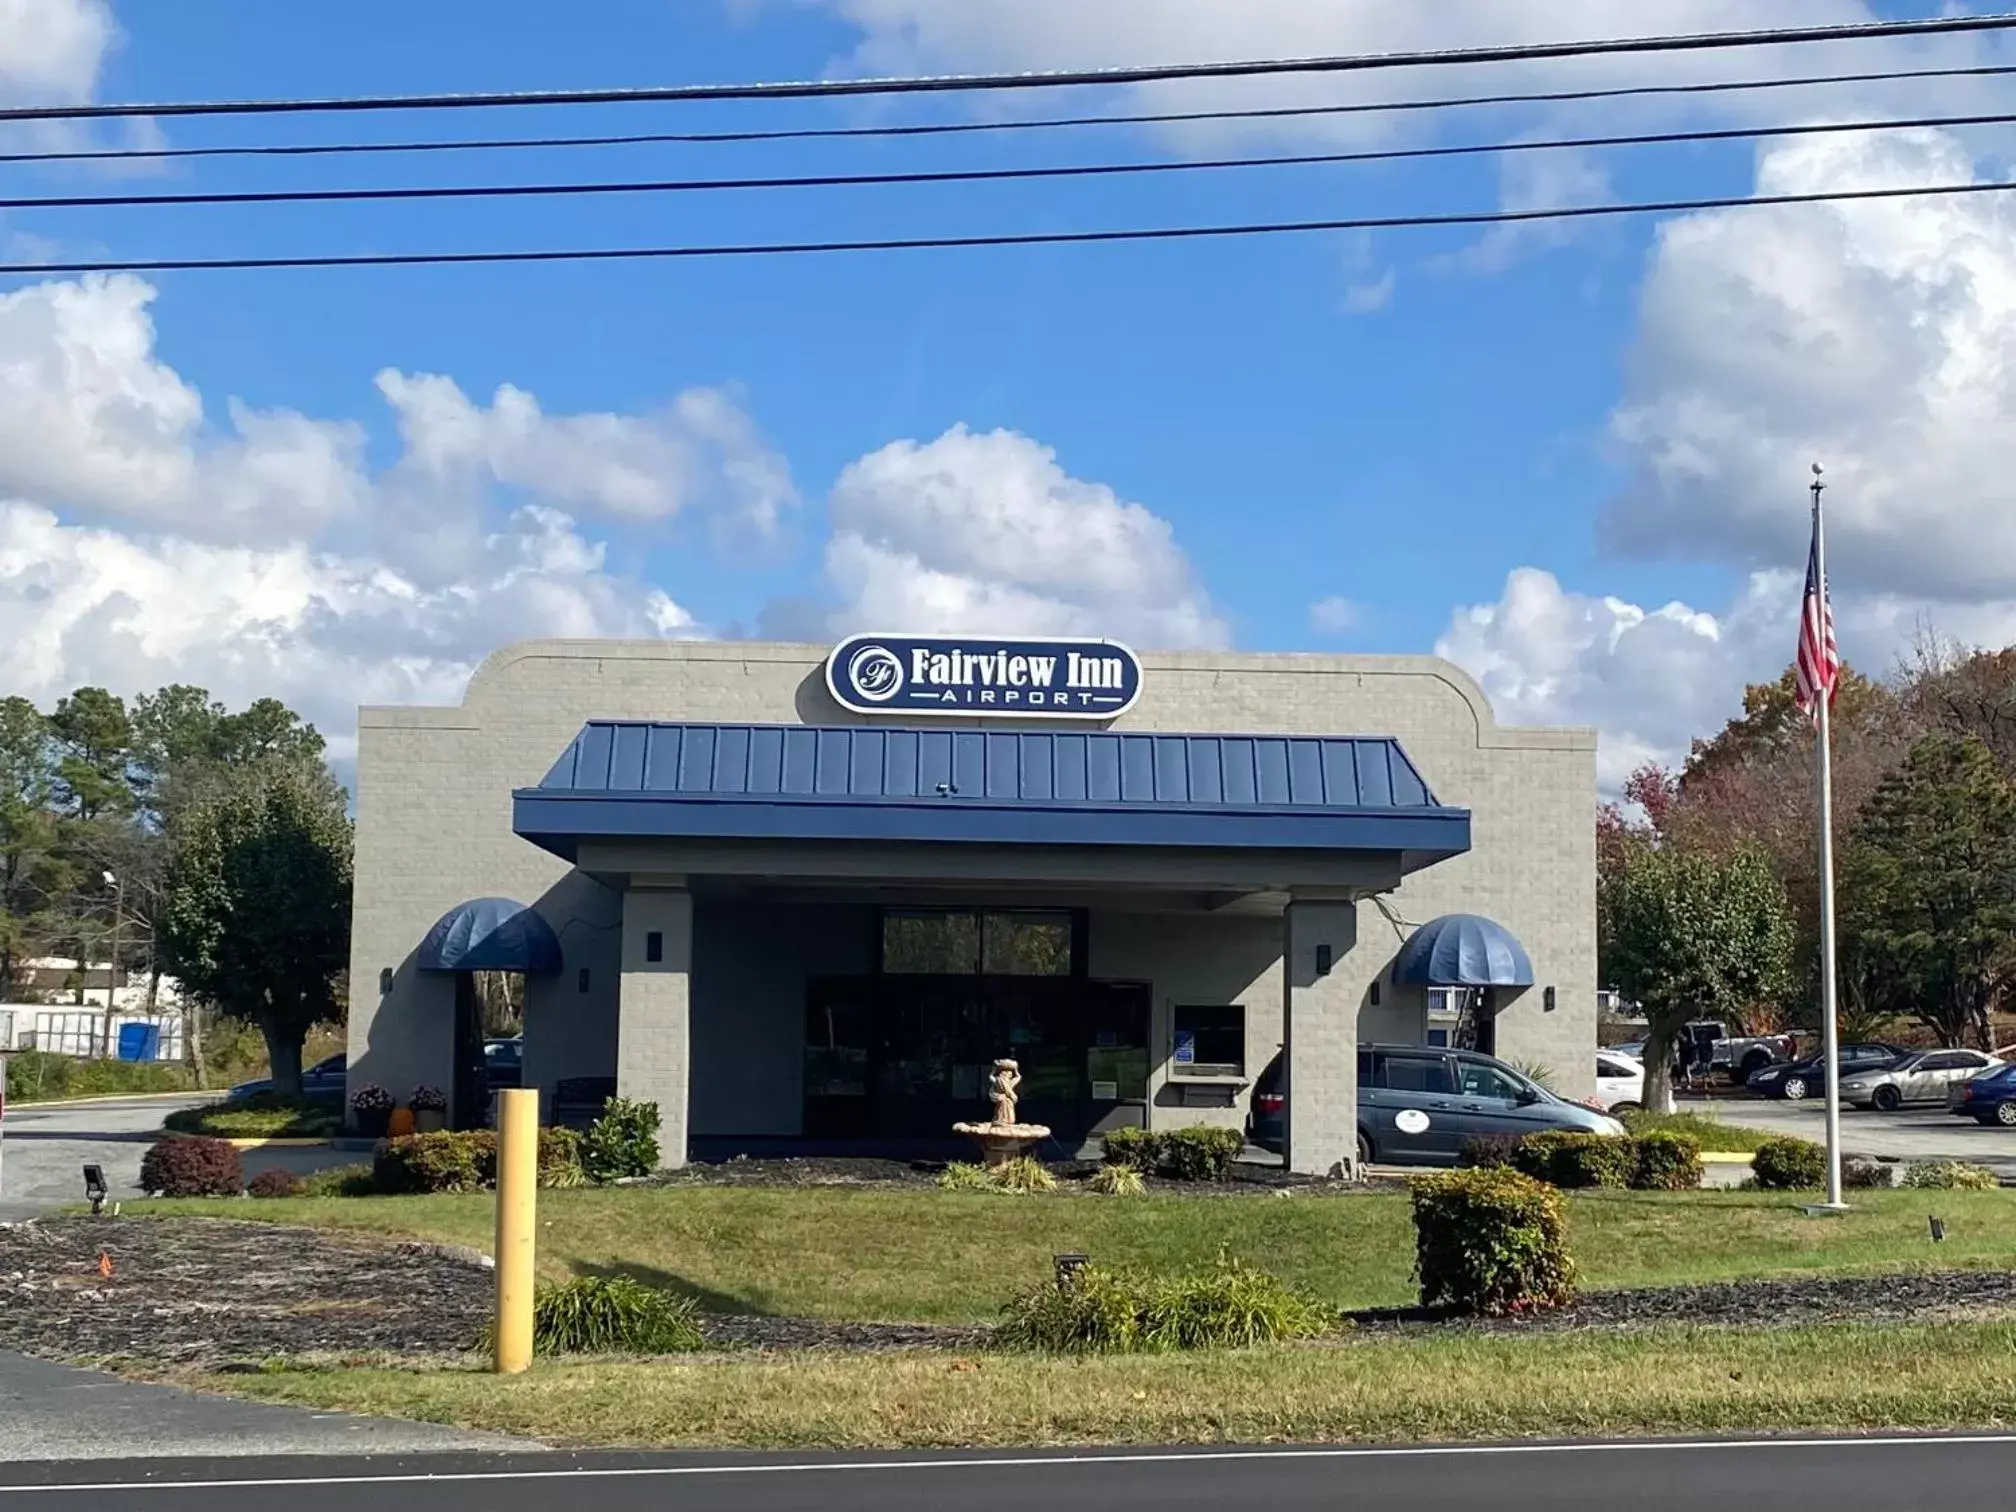 Property Building in Fairview Inn - Greensboro Airport